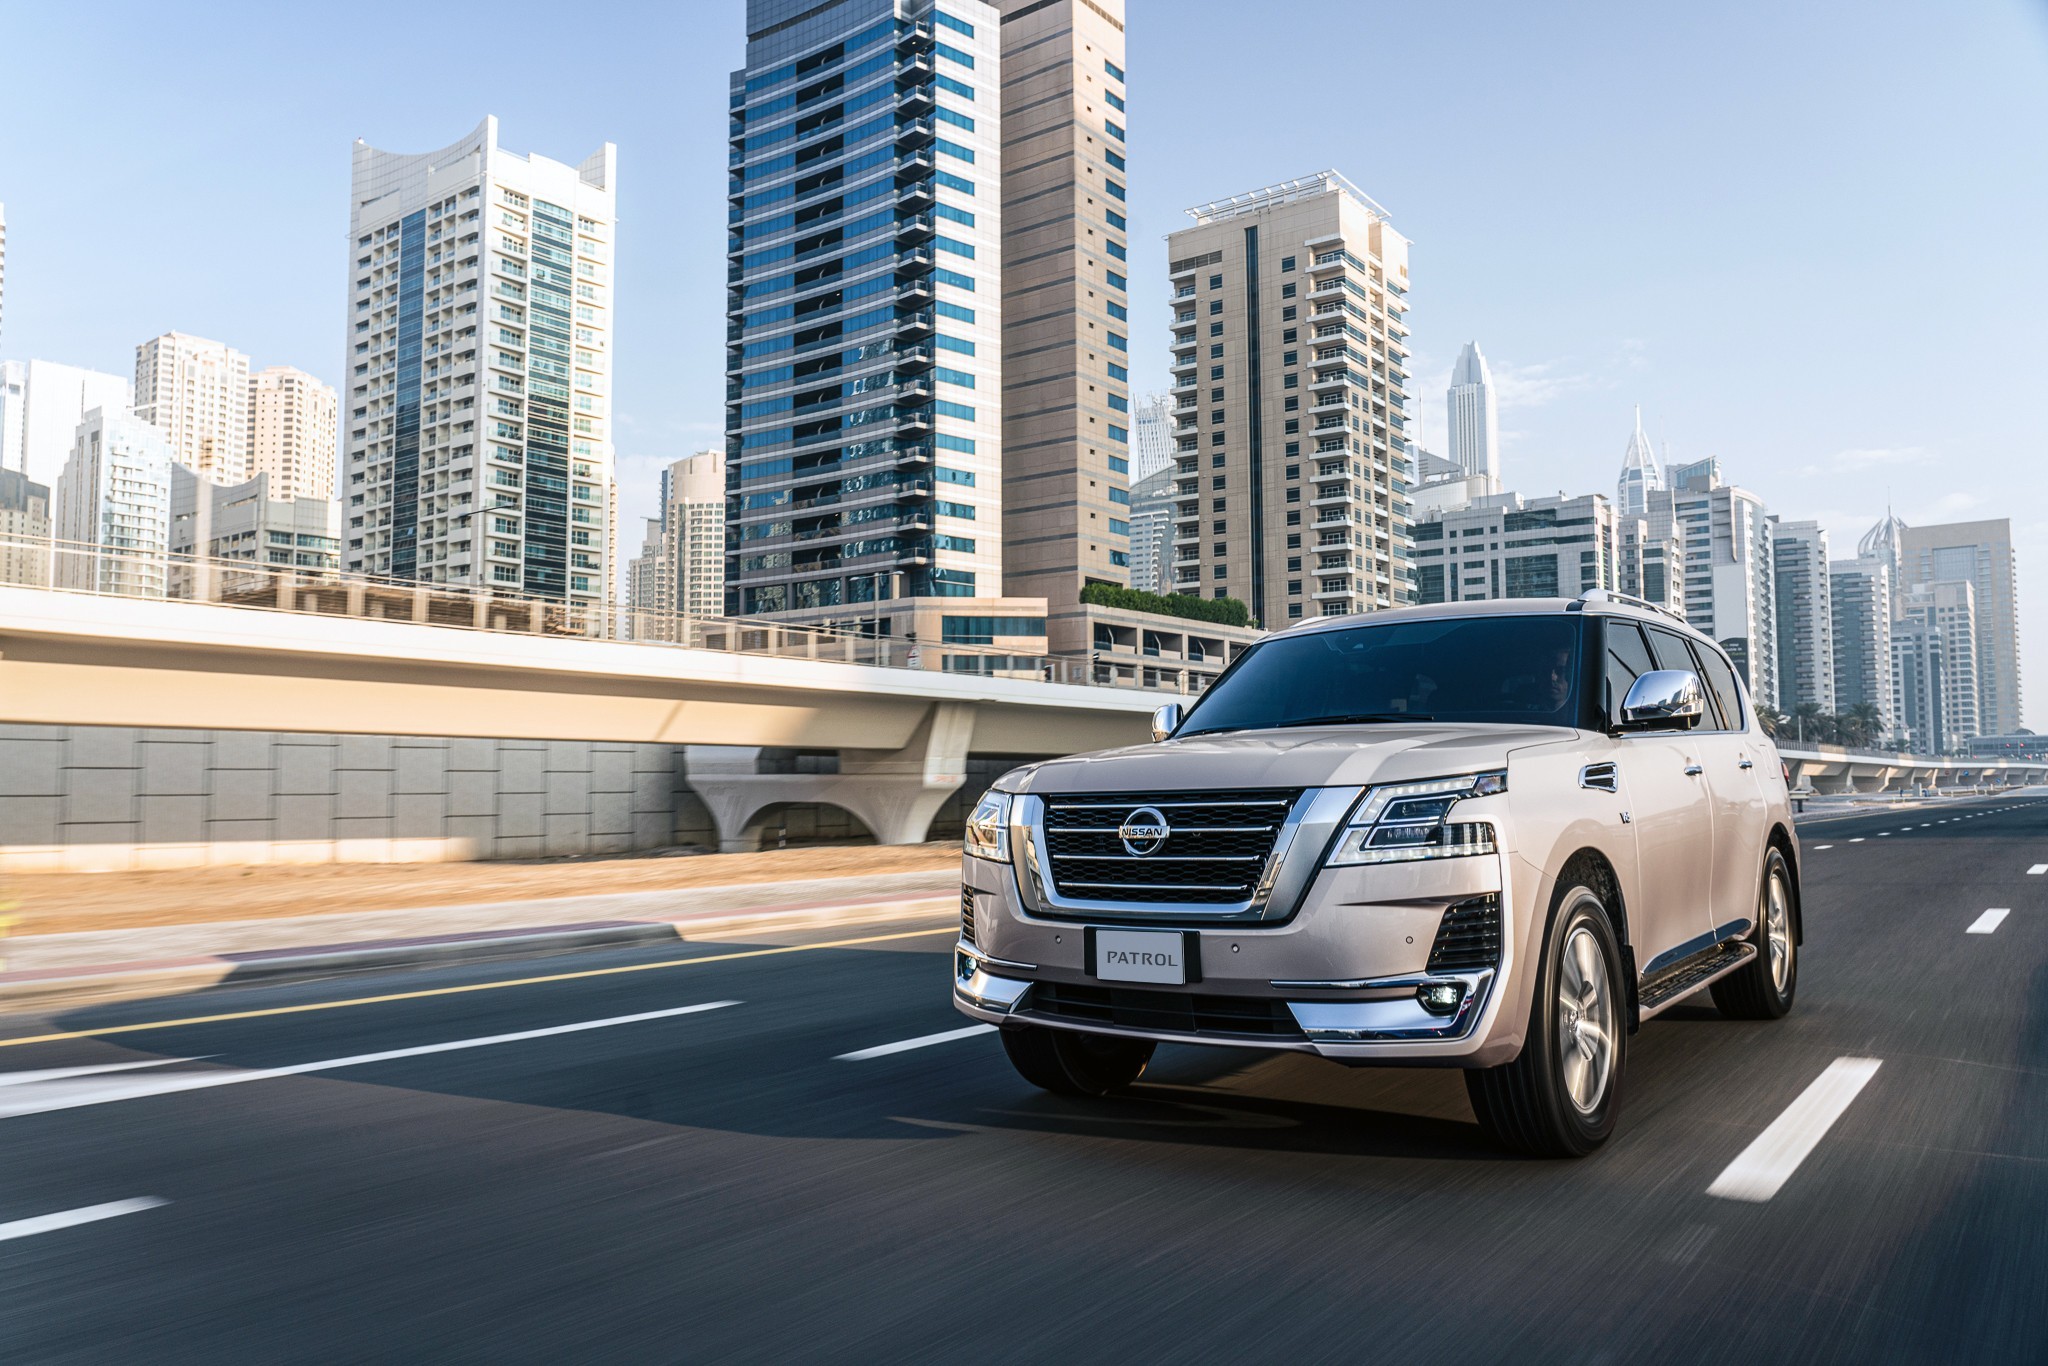 Nissan celebrates one year of the new Nissan Patrol with the introduction of a brand-new exterior colour to its 2021 edition